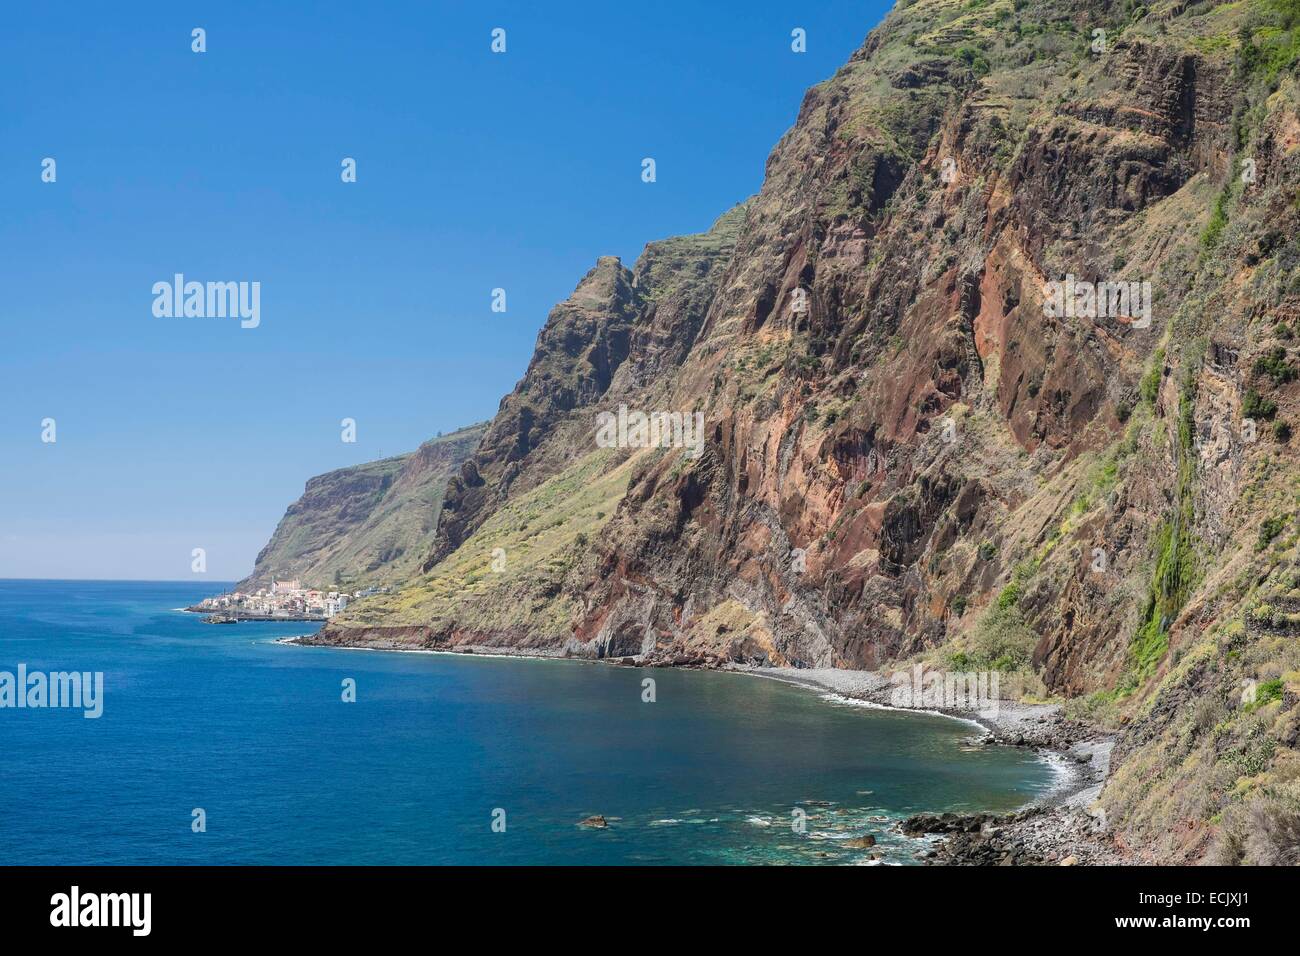 Portugal, Madeira island, the coast close to the picturesque village of Jardim do Mar, Paul do Mar in the background Stock Photo